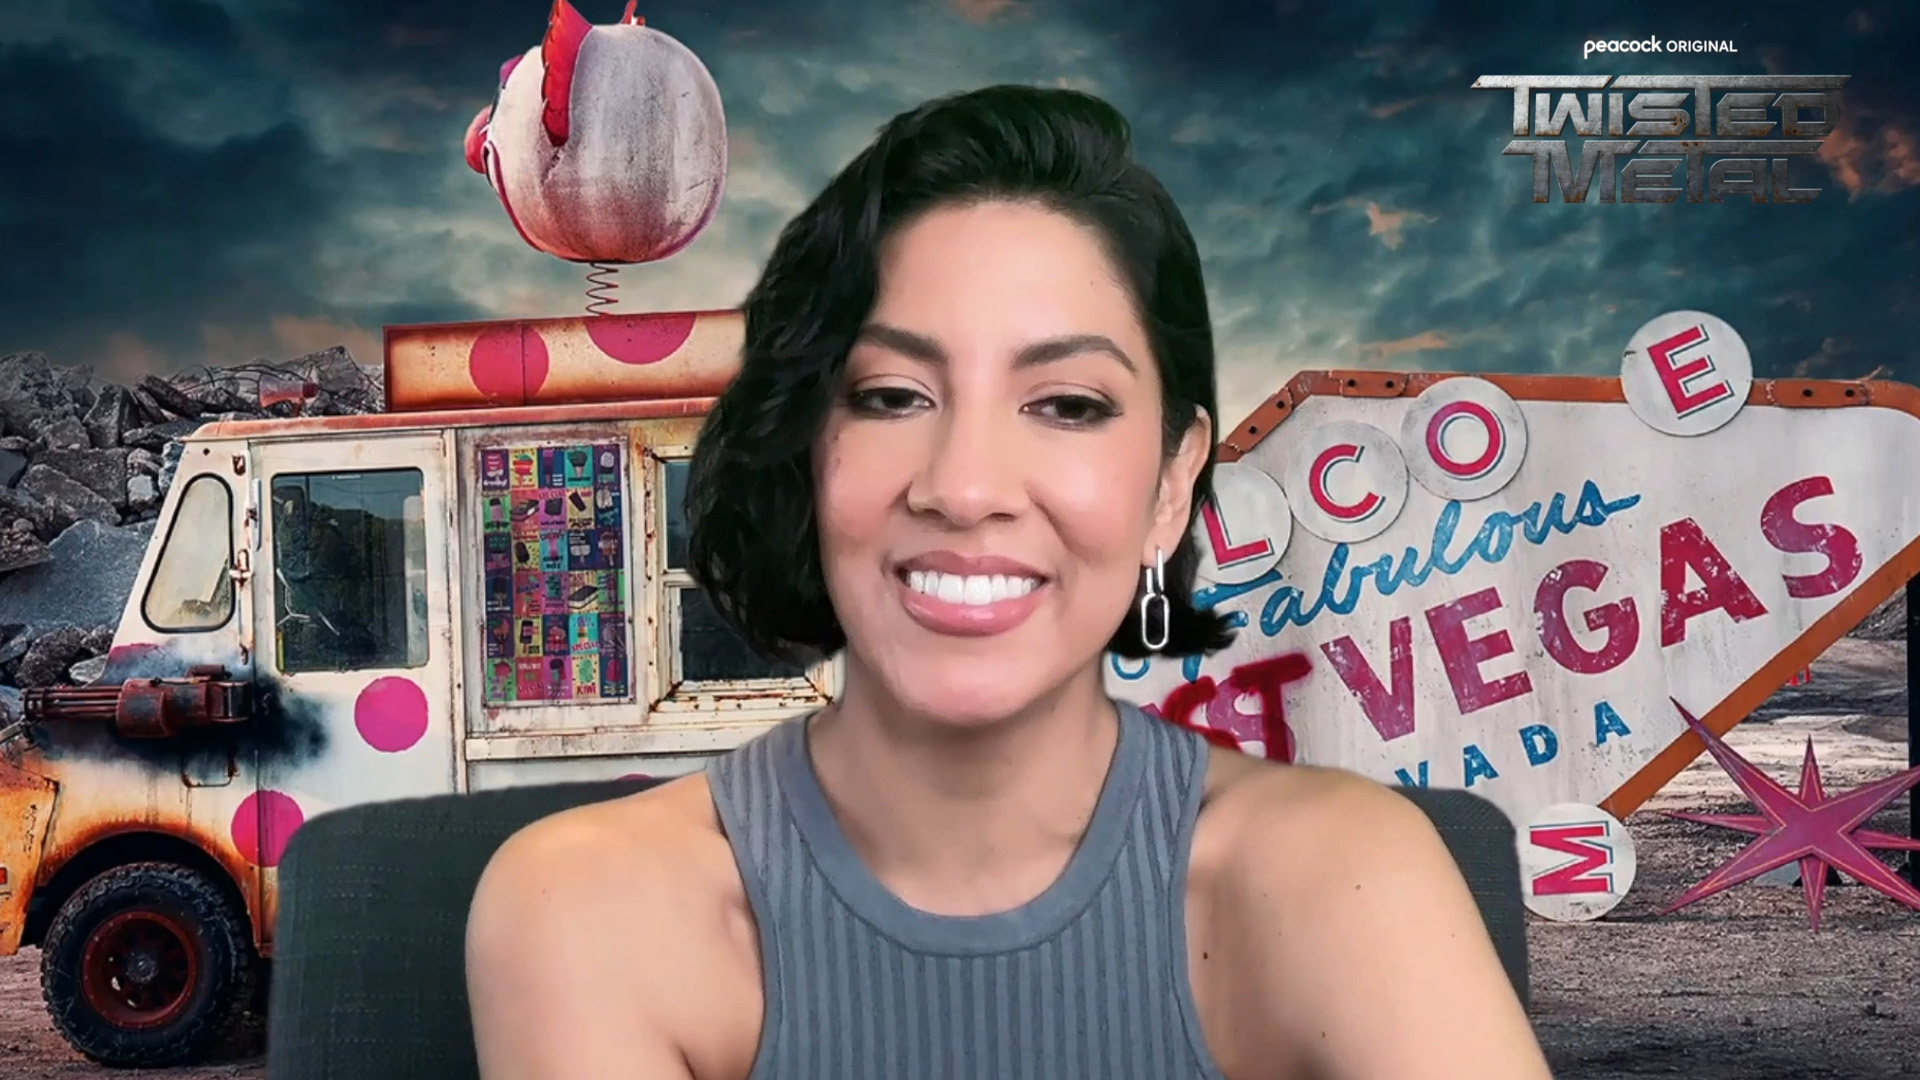 Twisted Metal Features One Of TV's Most Bonkers Sex Scenes, And Stephanie  Beatriz Told Us About Her 'Bonding Experience' With Anthony Mackie